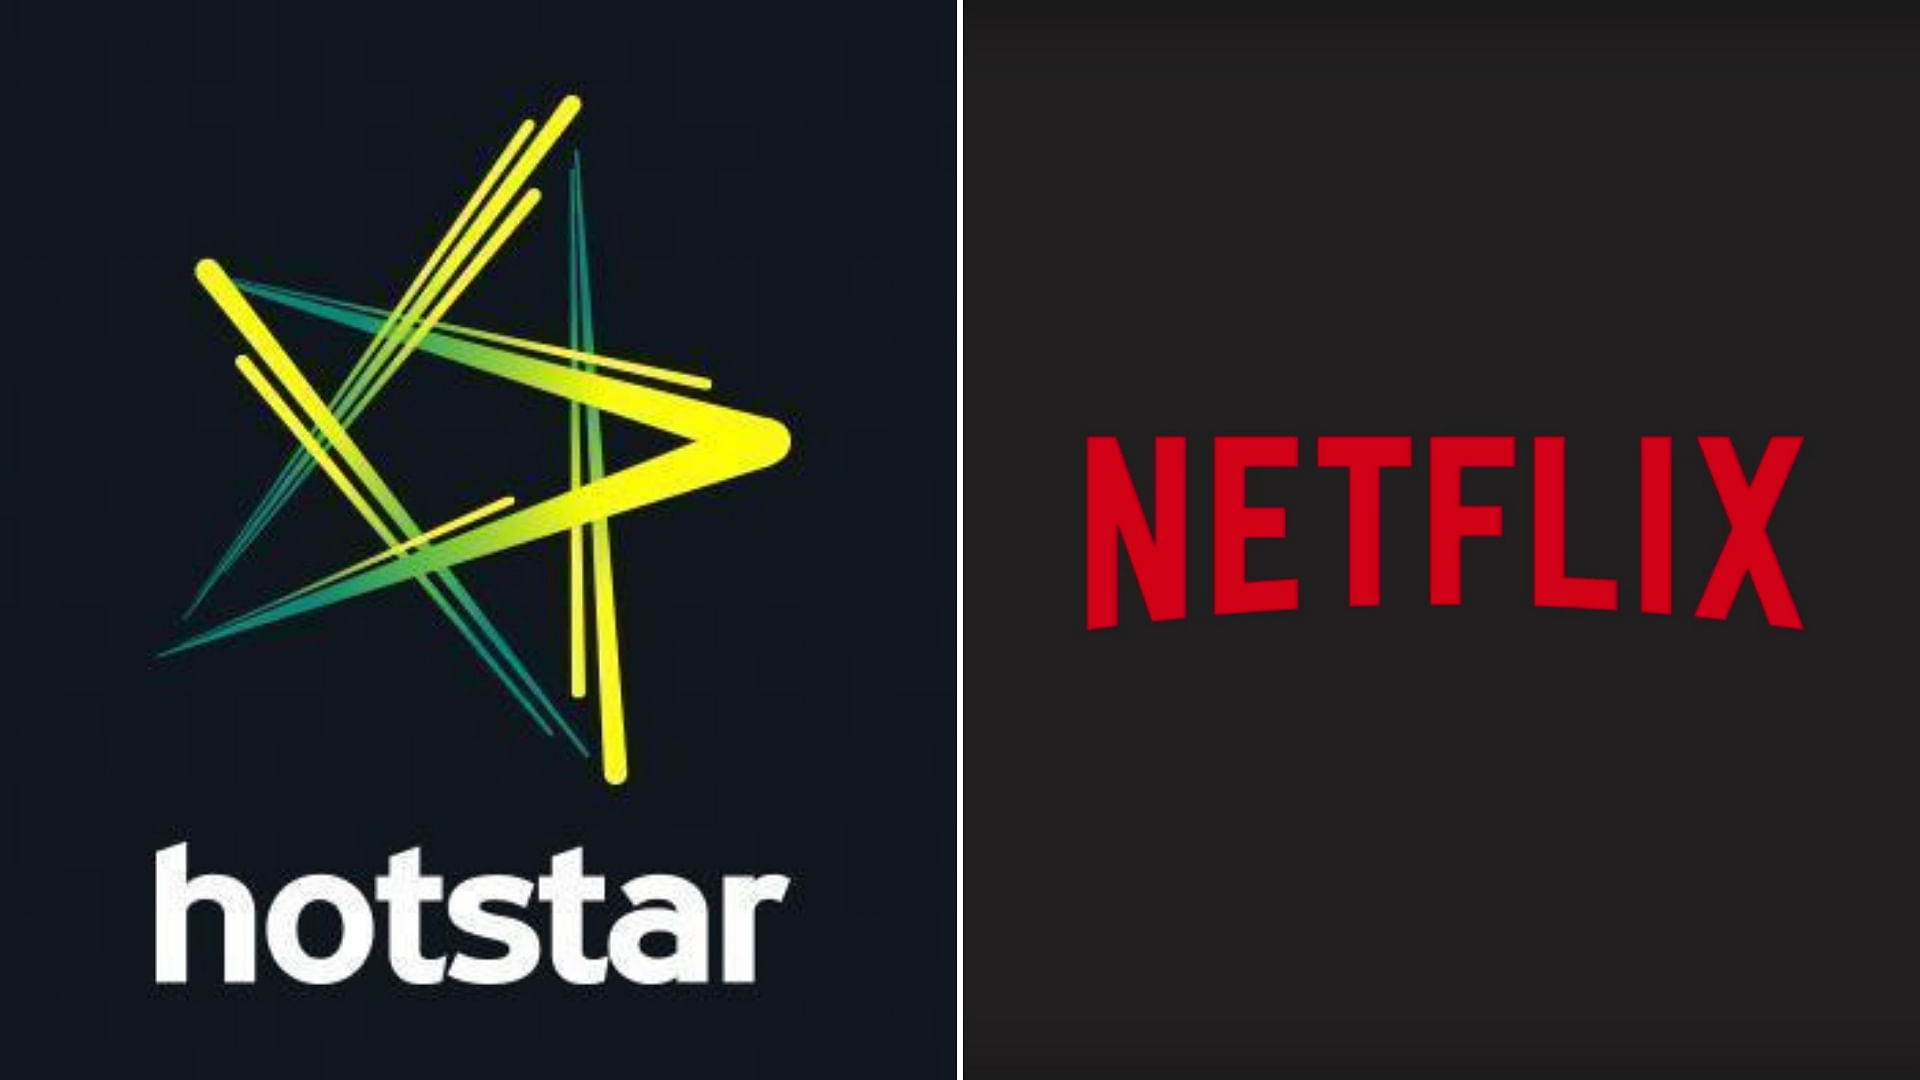 Hotstar and Netflix and other streaming platforms have signed a code to self-regulate content.